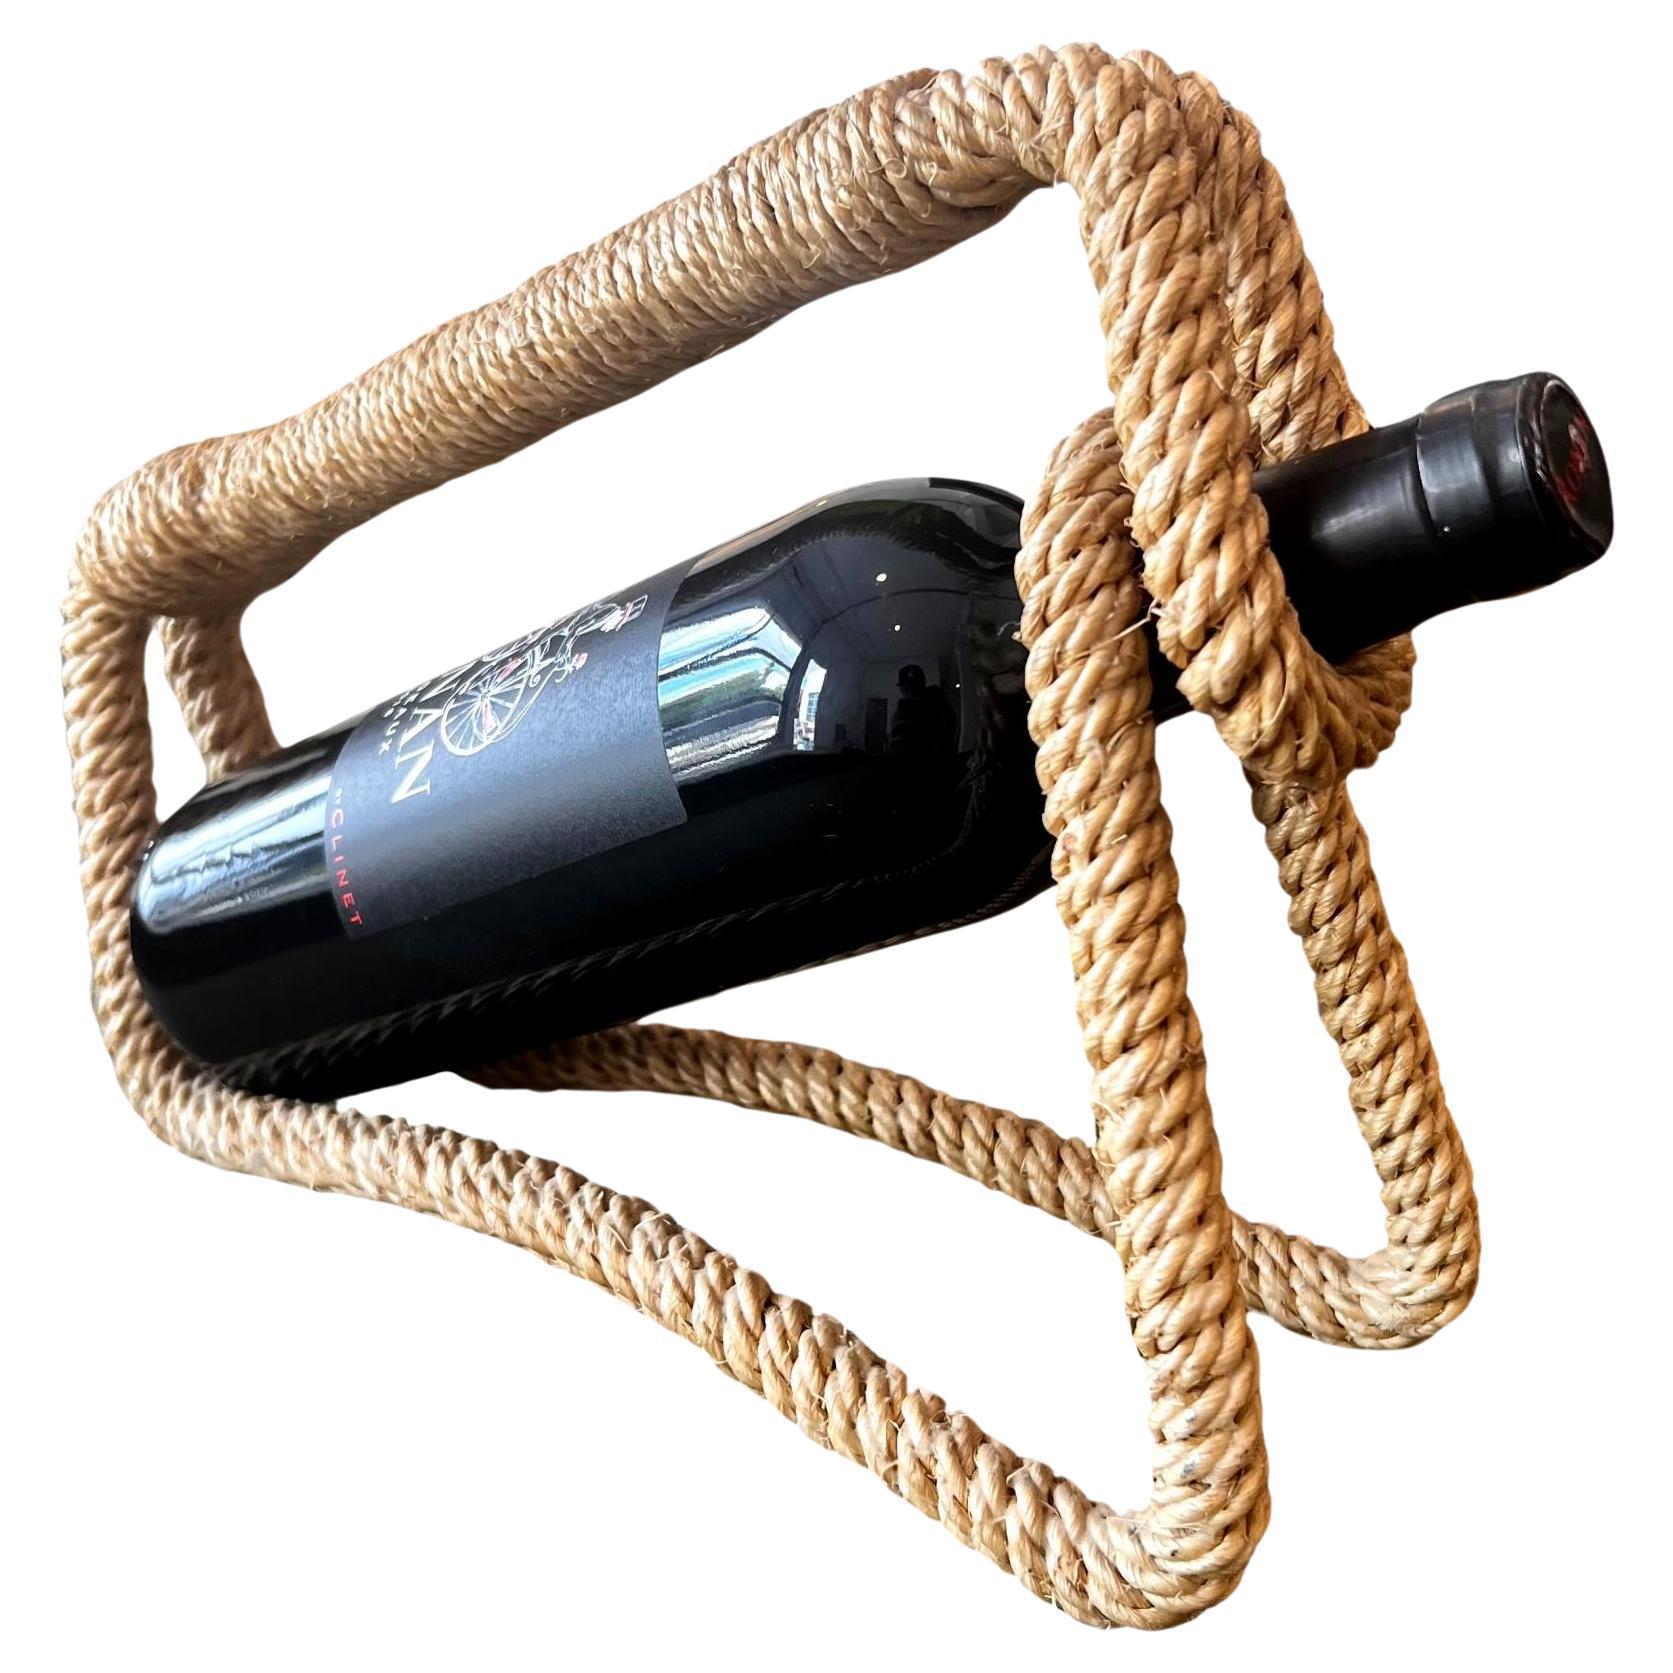 Rope Wine Bottle Holder by Audoux and Minet, France circa 1960